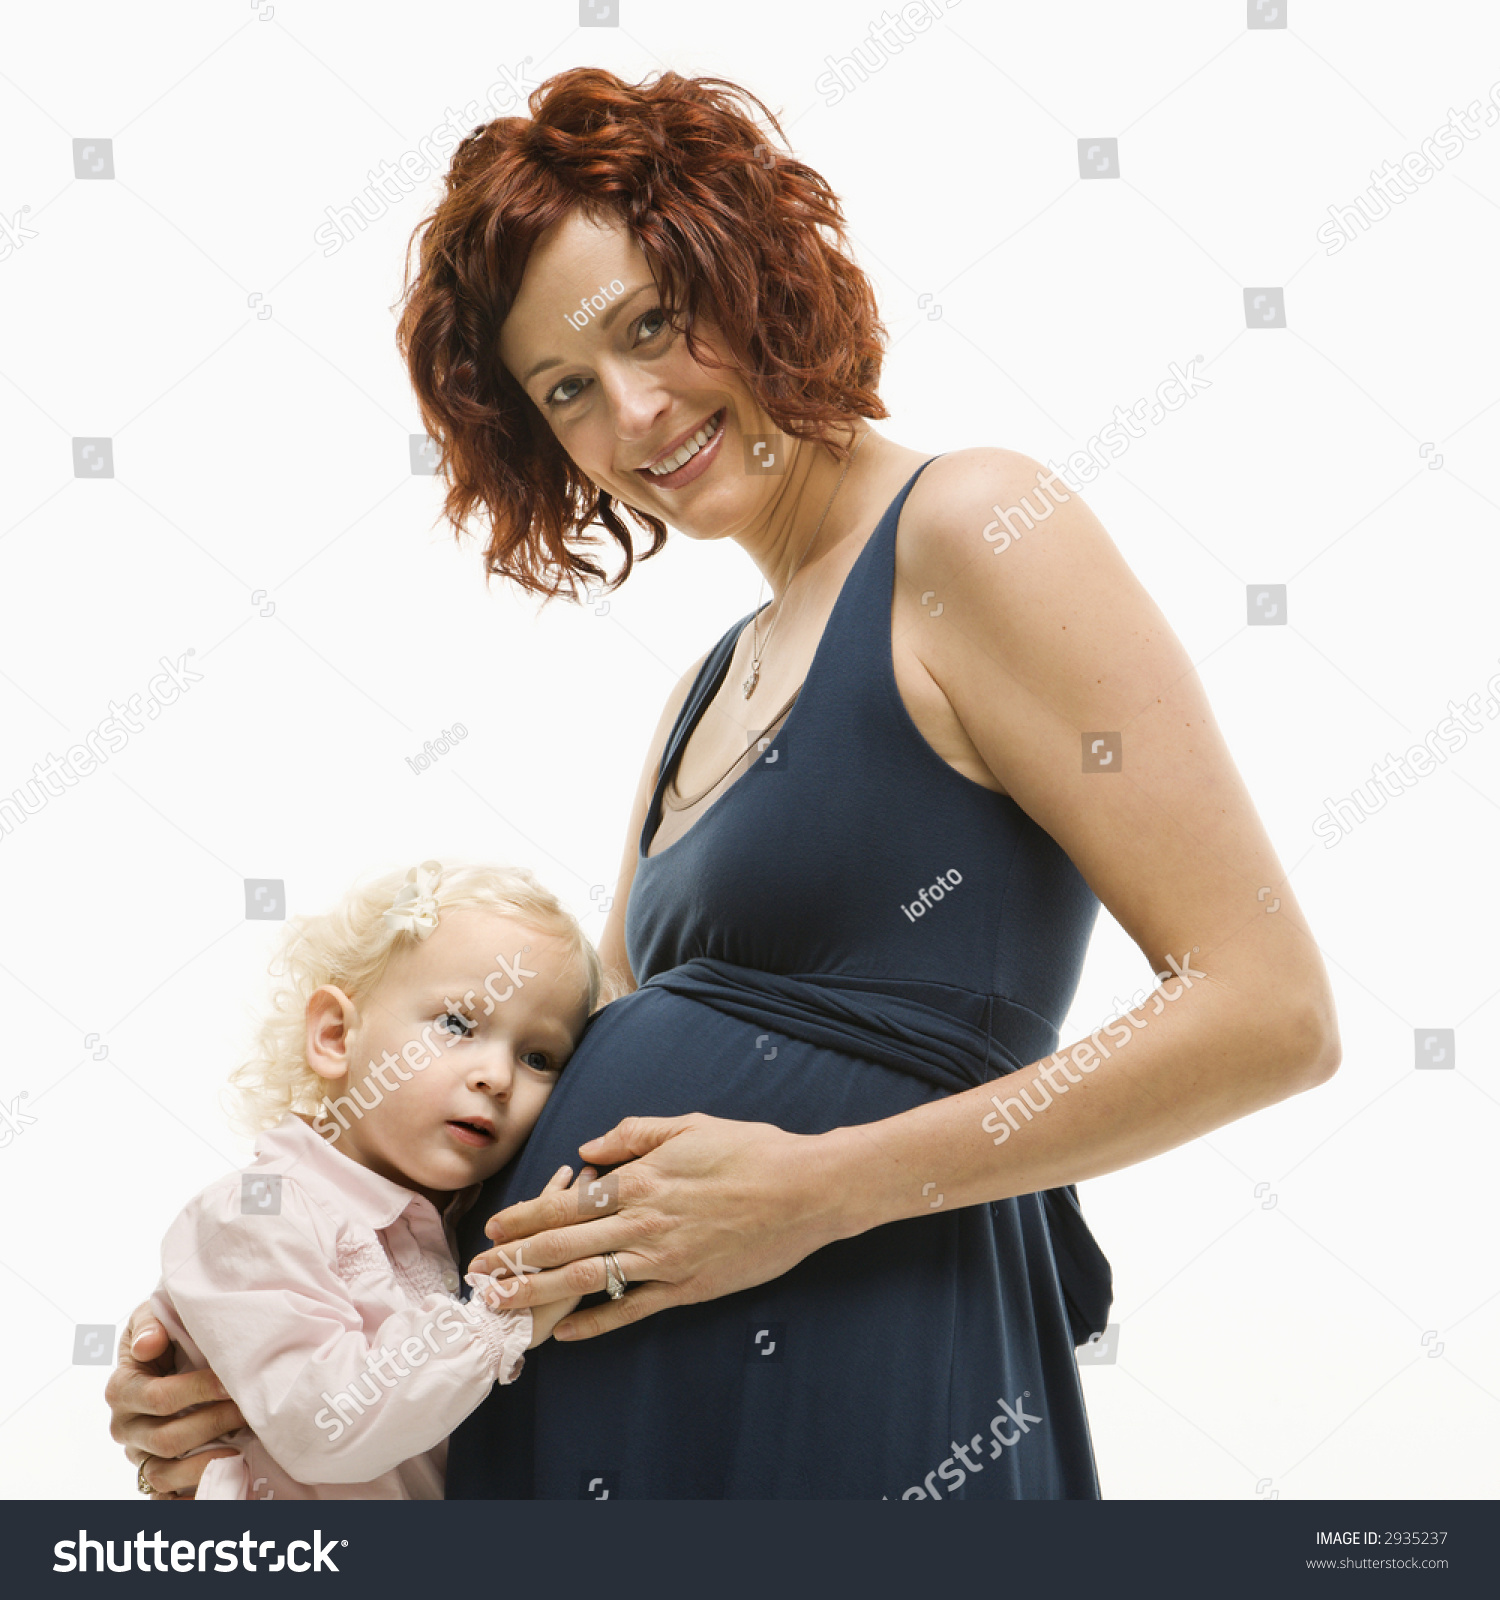 Caucasion Midadult Attractive Pregnant Smiling Woman Stock Photo ...